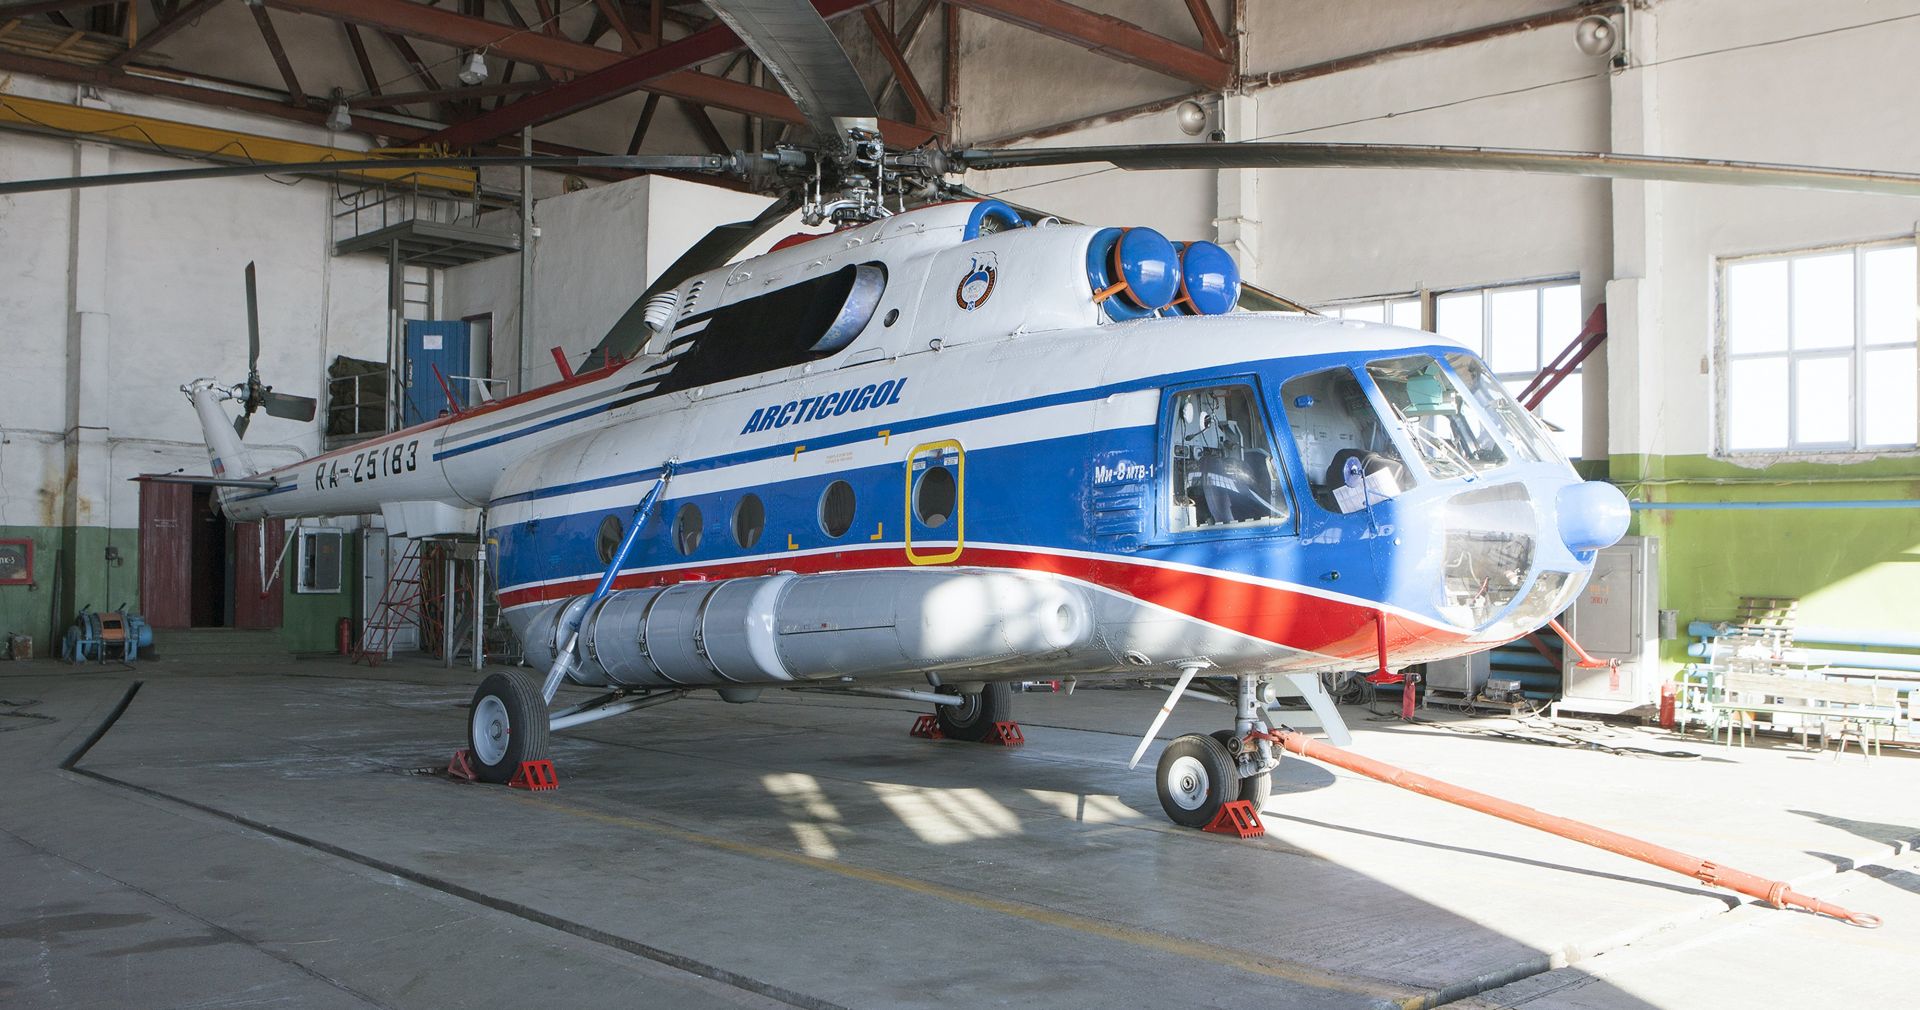 epa06291056 (FILE) - A Russian helicopter in a hanger  at it's base, Kapp Heer at Barentsburg, Norway, 05 May 2011. Reports state that a Russian helicopter with eight people aboard has crashed in the sea outside Barentsburg at Svalbard, Spitsbergen,  and the Norway Rescue Service then confirmed the helicopter 'came down' just 2km off the coast of Barentsburg.  EPA/Birger Amundsen NORWAY OUT NORWAY OUT